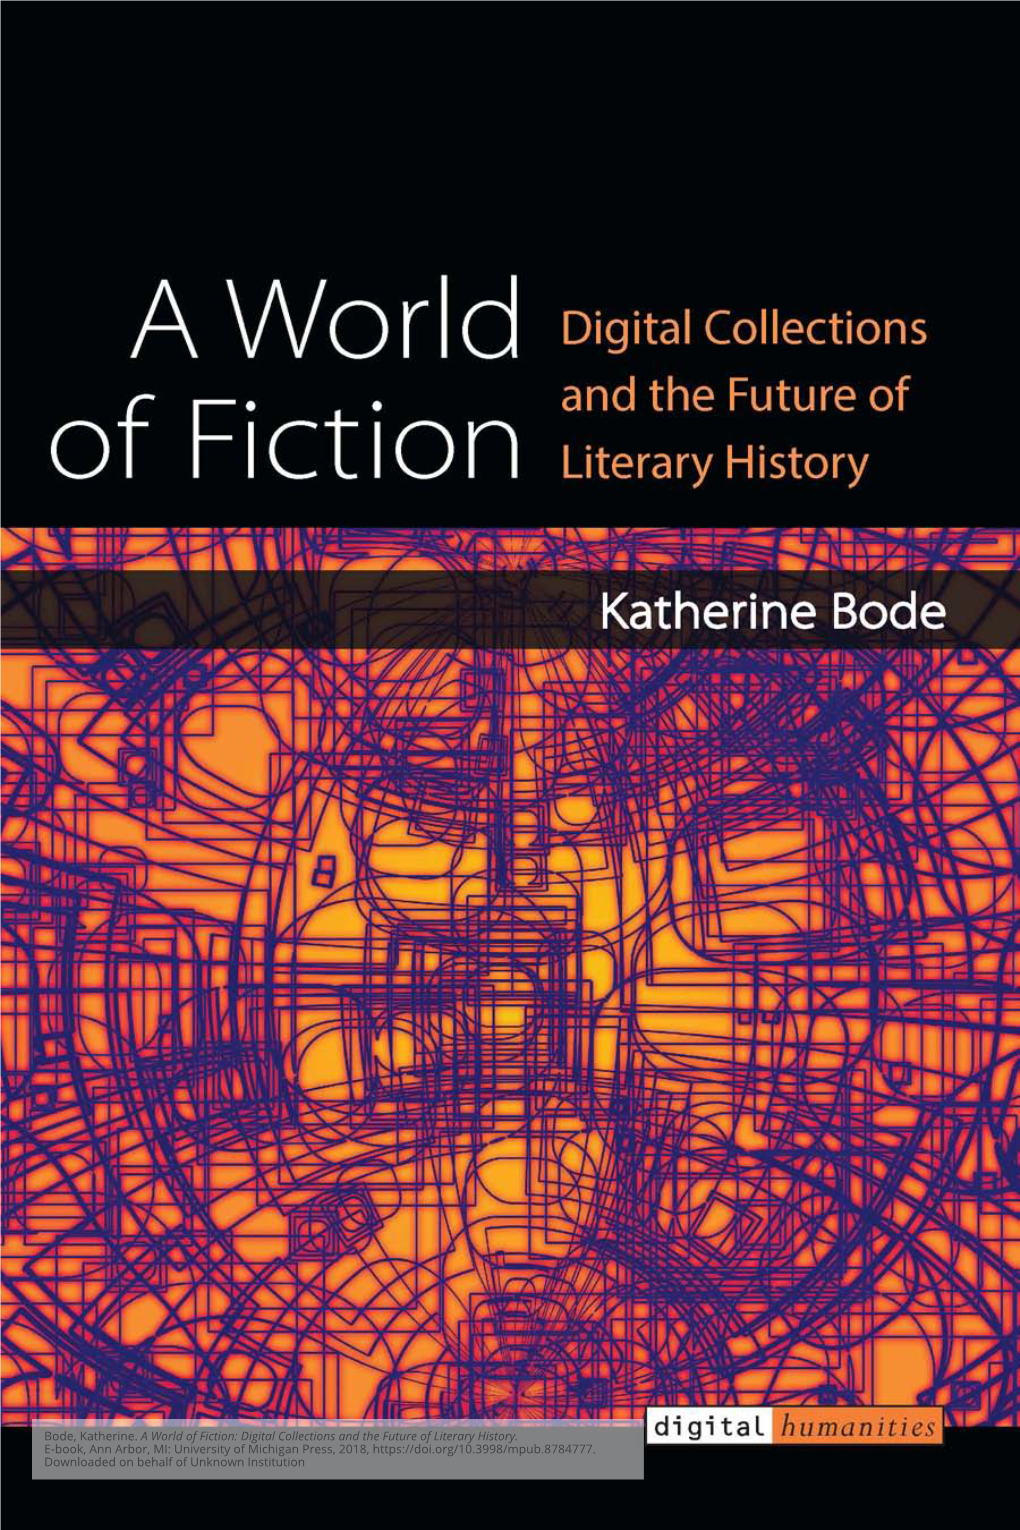 Digital Collections and the Future of Literary History